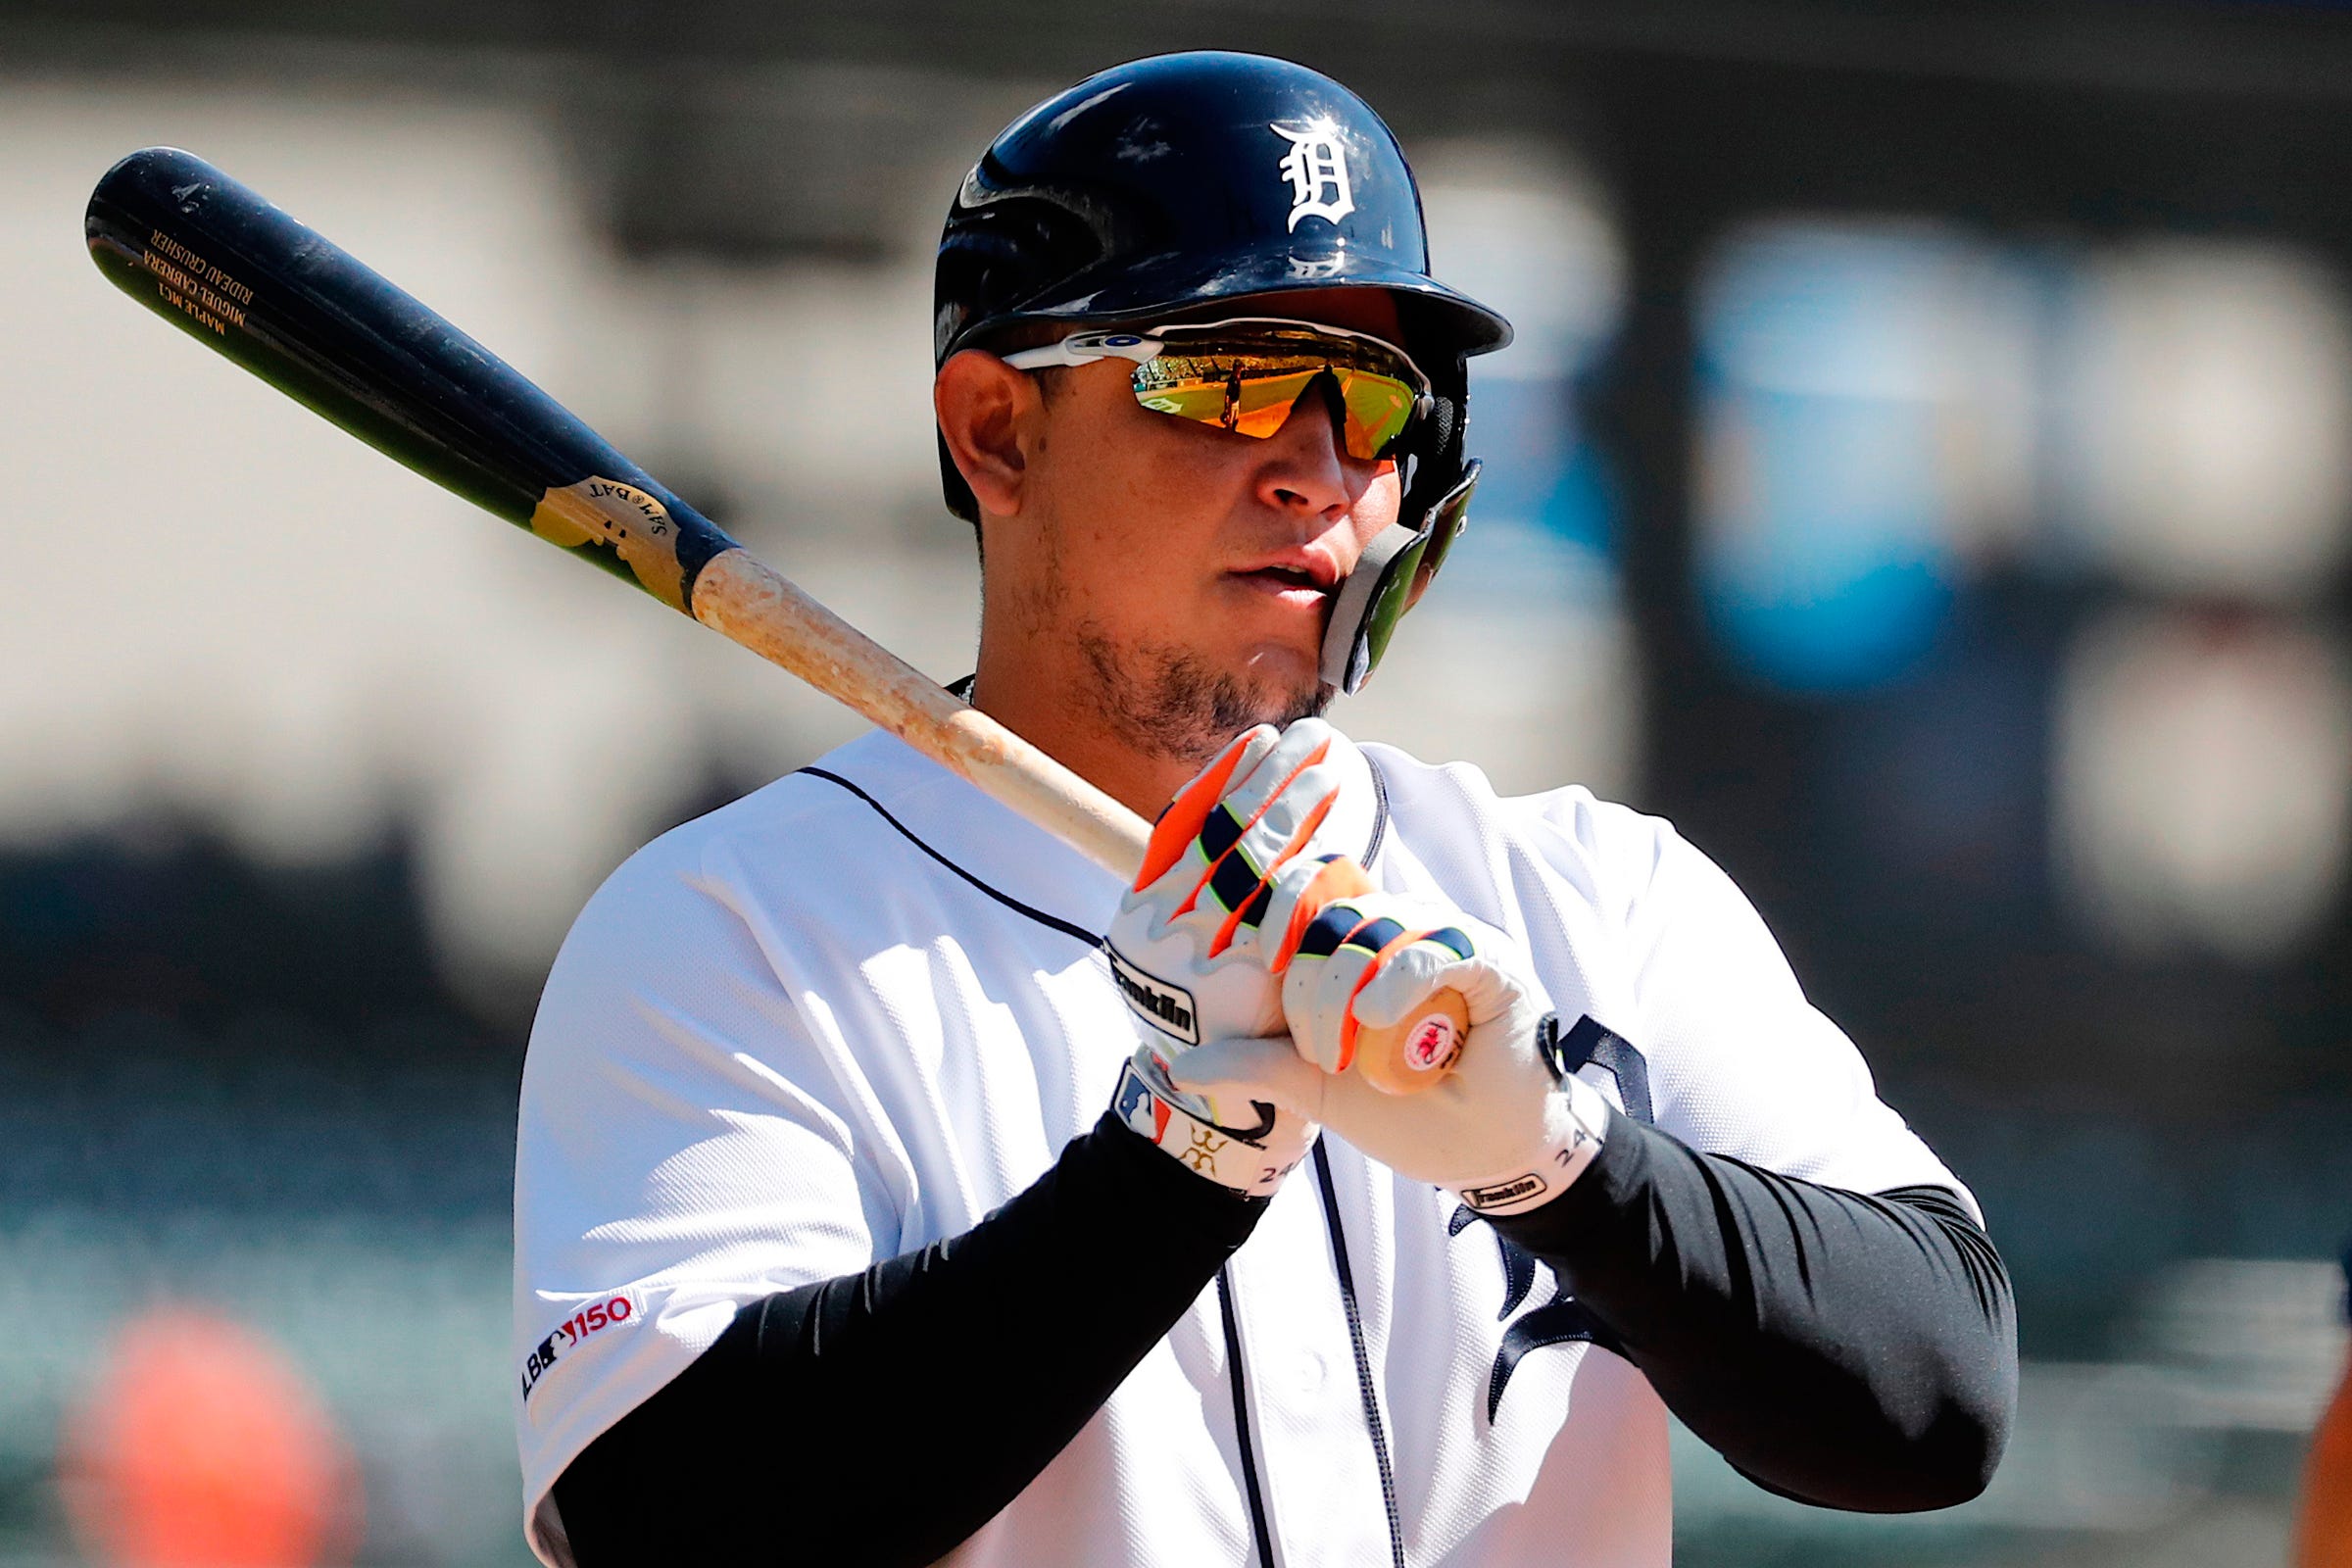 Tigers designated hitter Miguel Cabrera gets set to bat in the first inning on Thursday, Sept. 26, 2019, at Comerica Park.